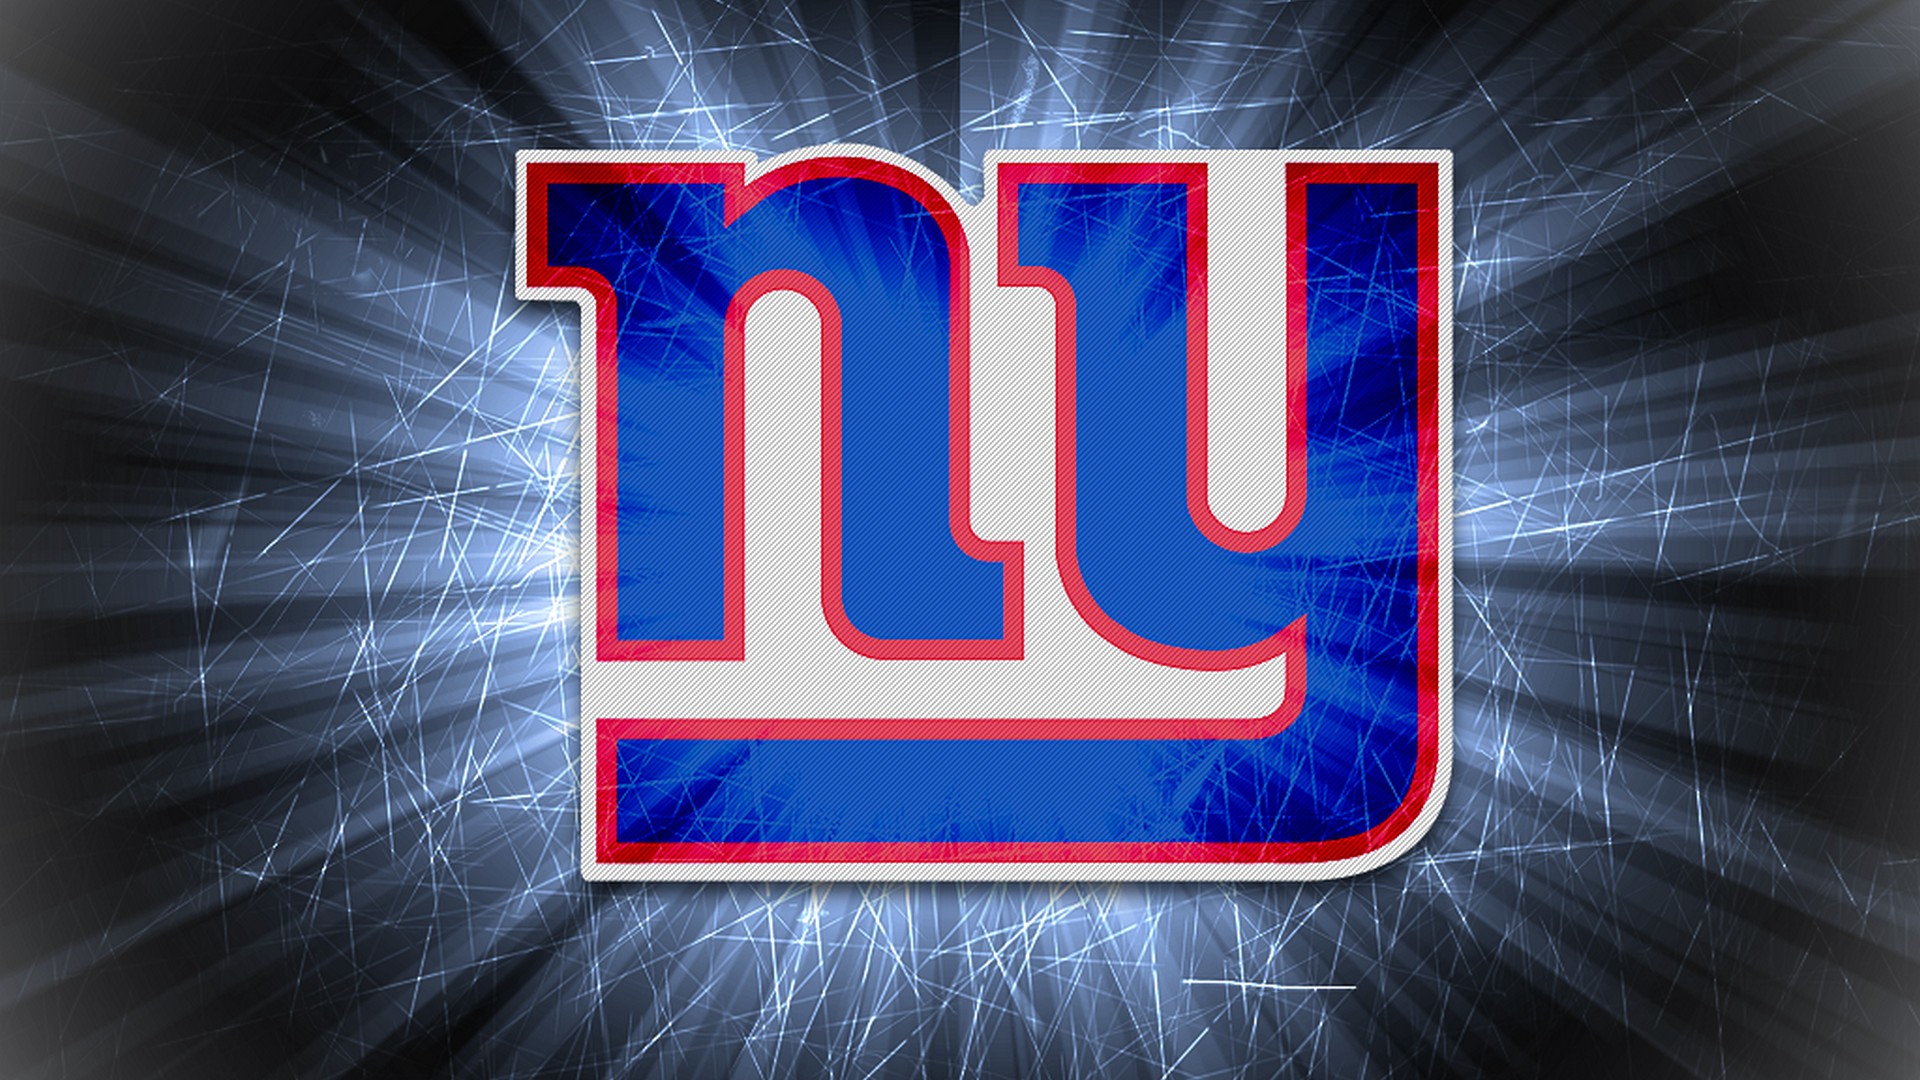 New York Giants HD Wallpapers with high-resolution 1920x1080 pixel. You can use this wallpaper for your Mac or Windows Desktop Background, iPhone, Android or Tablet and another Smartphone device